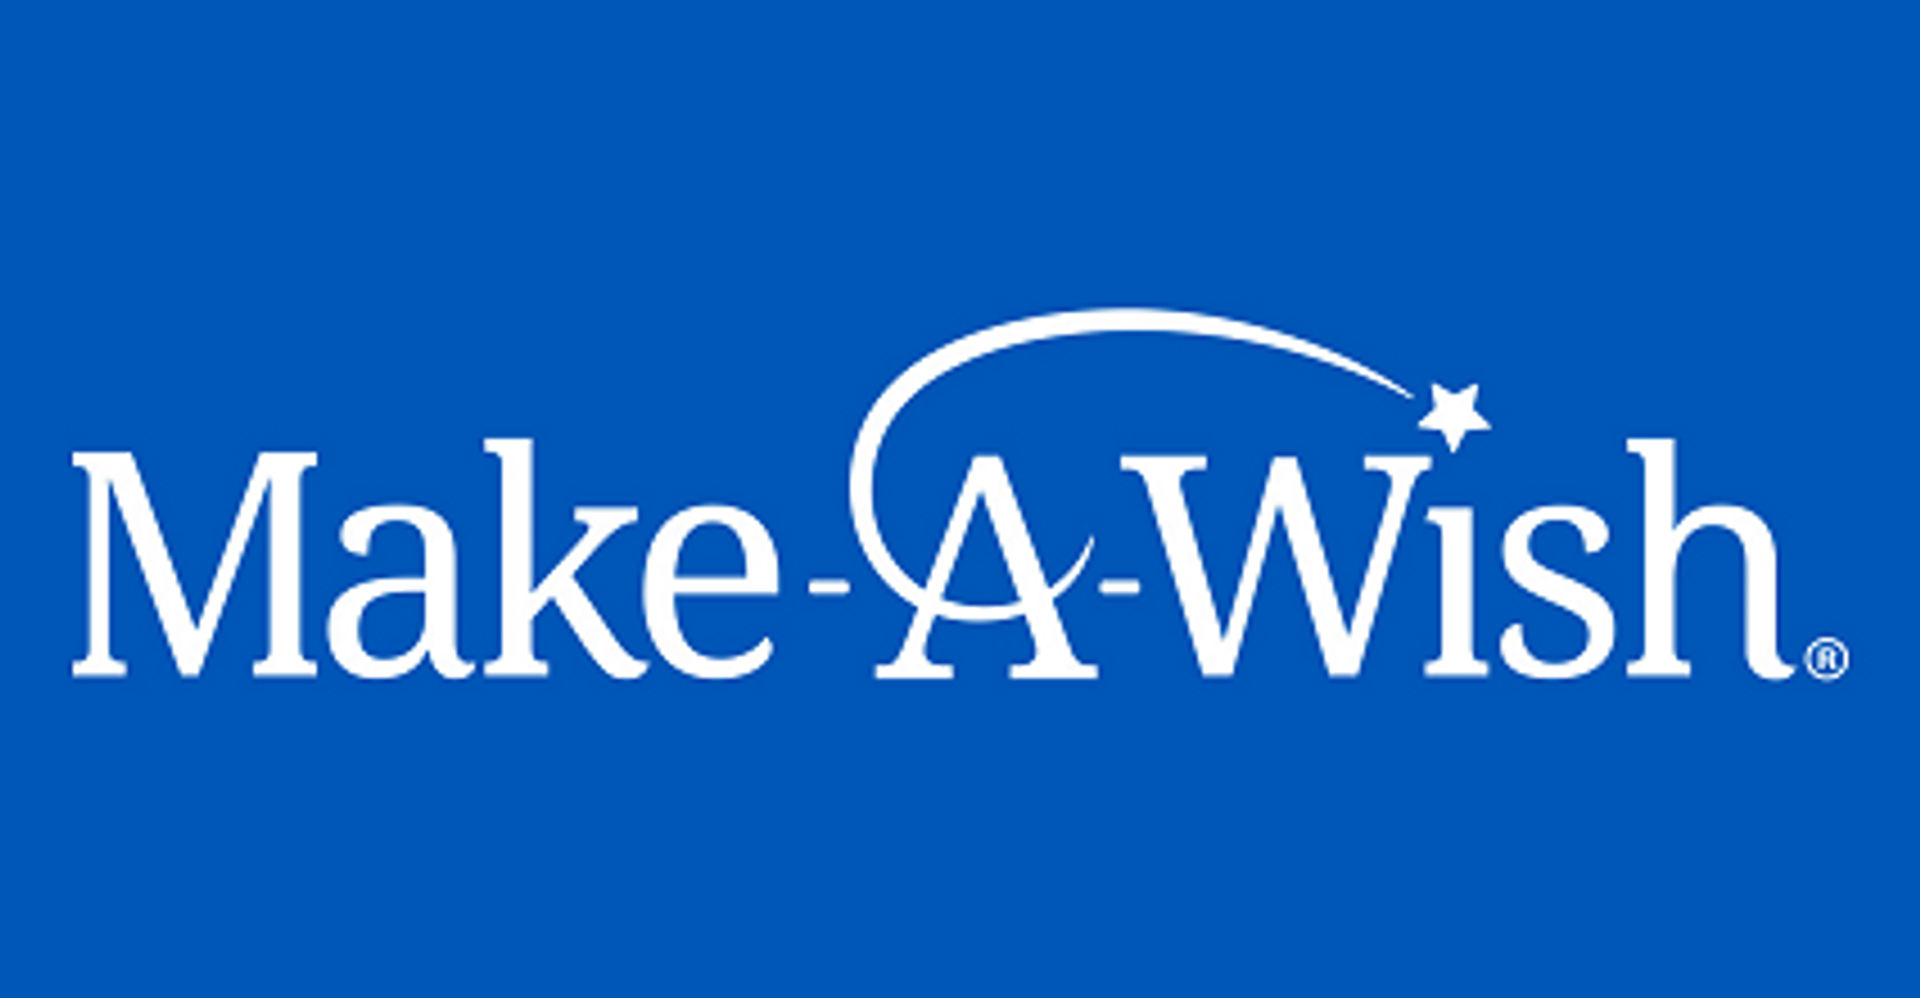 Next Phase - World Wish Day – a word from our charity partner, Make-a-Wish UK